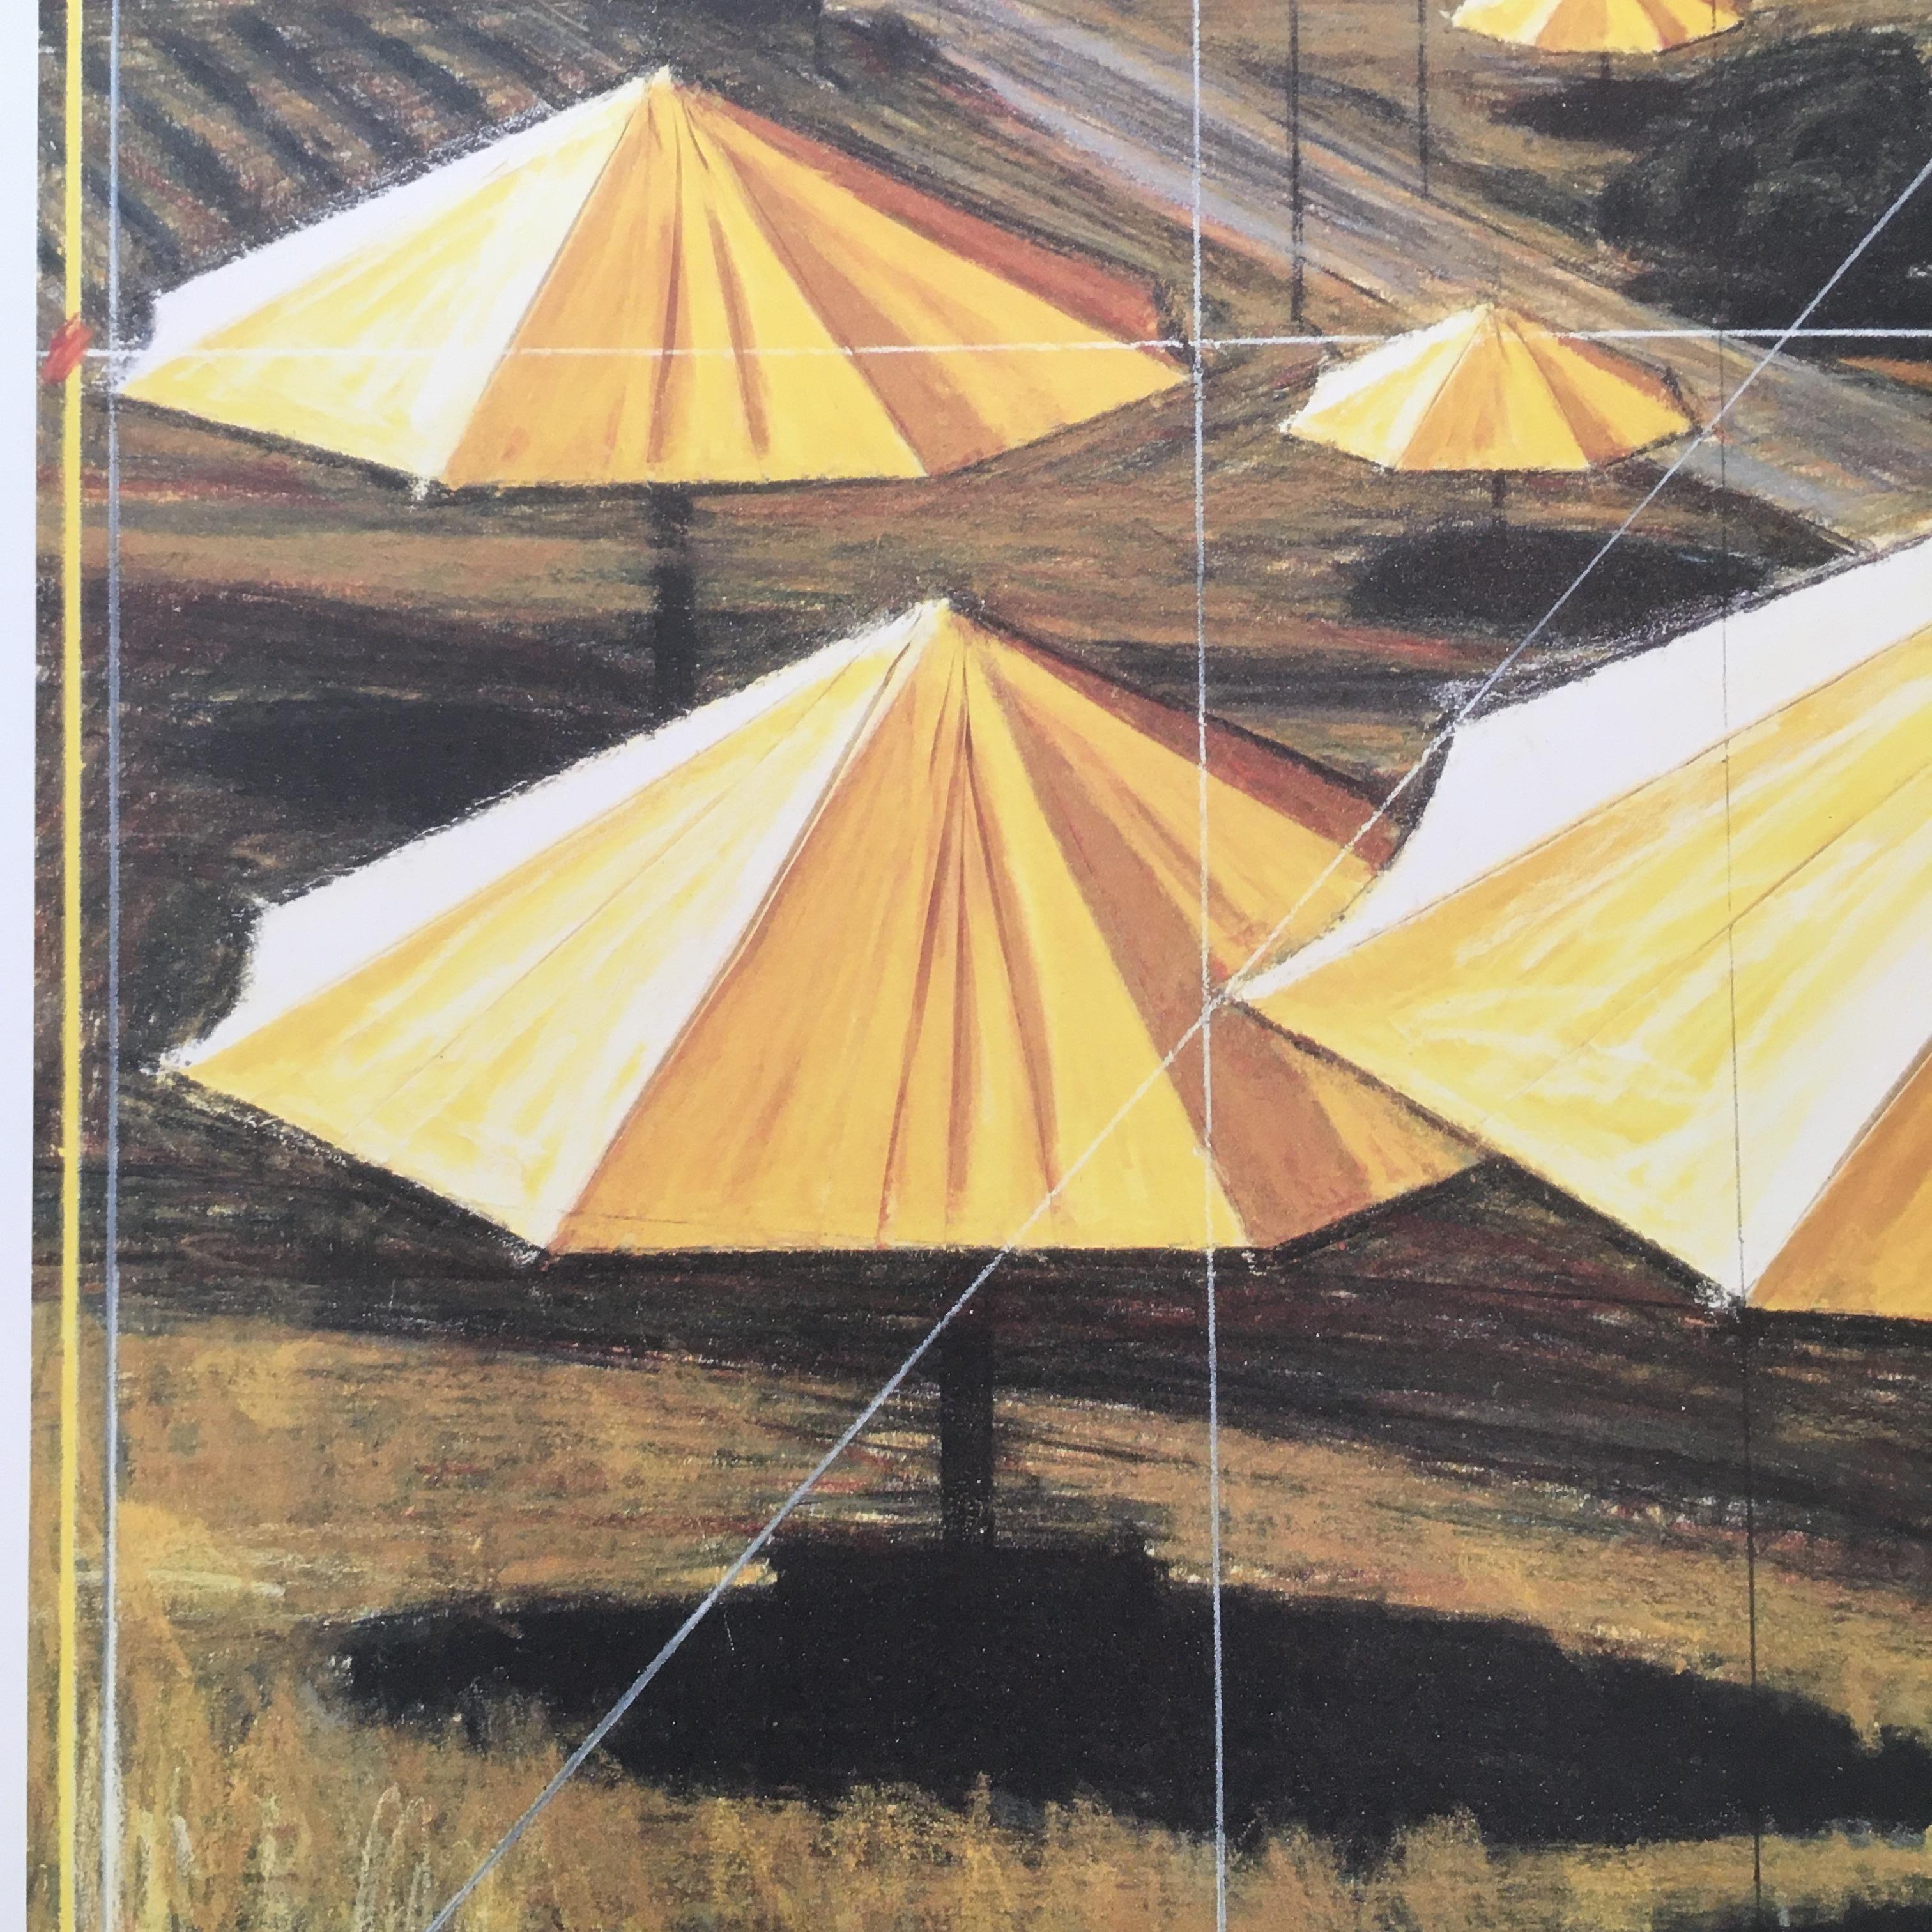 Christo 'The Umbrellas' Signed Print (California USA Yellow) - Beige Landscape Print by Christo and Jeanne-Claude